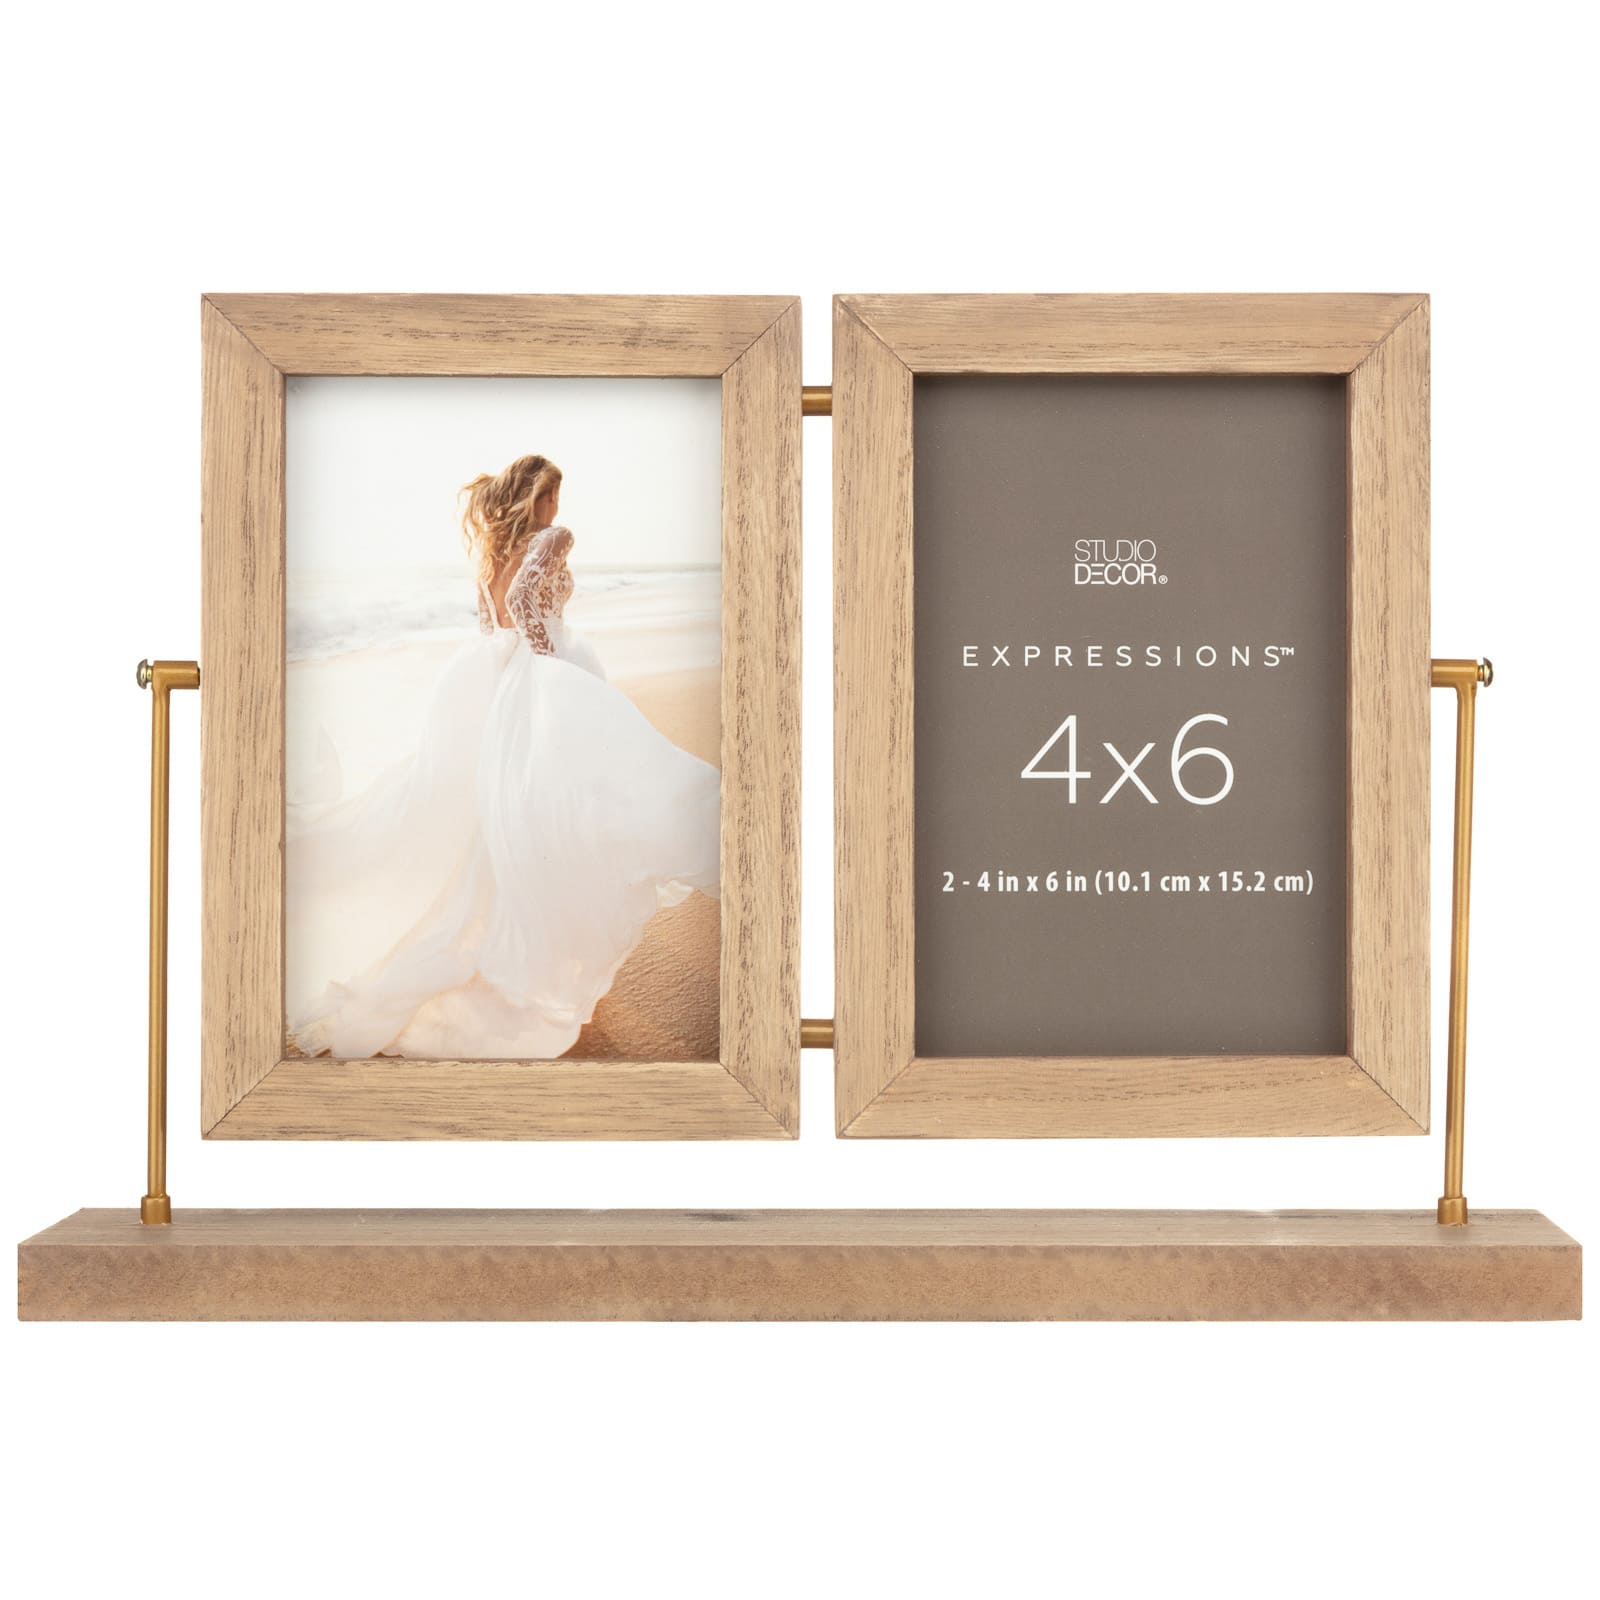 Choose Design Silver Glitter & Mirror 4"x6" Photo Frame with Number 